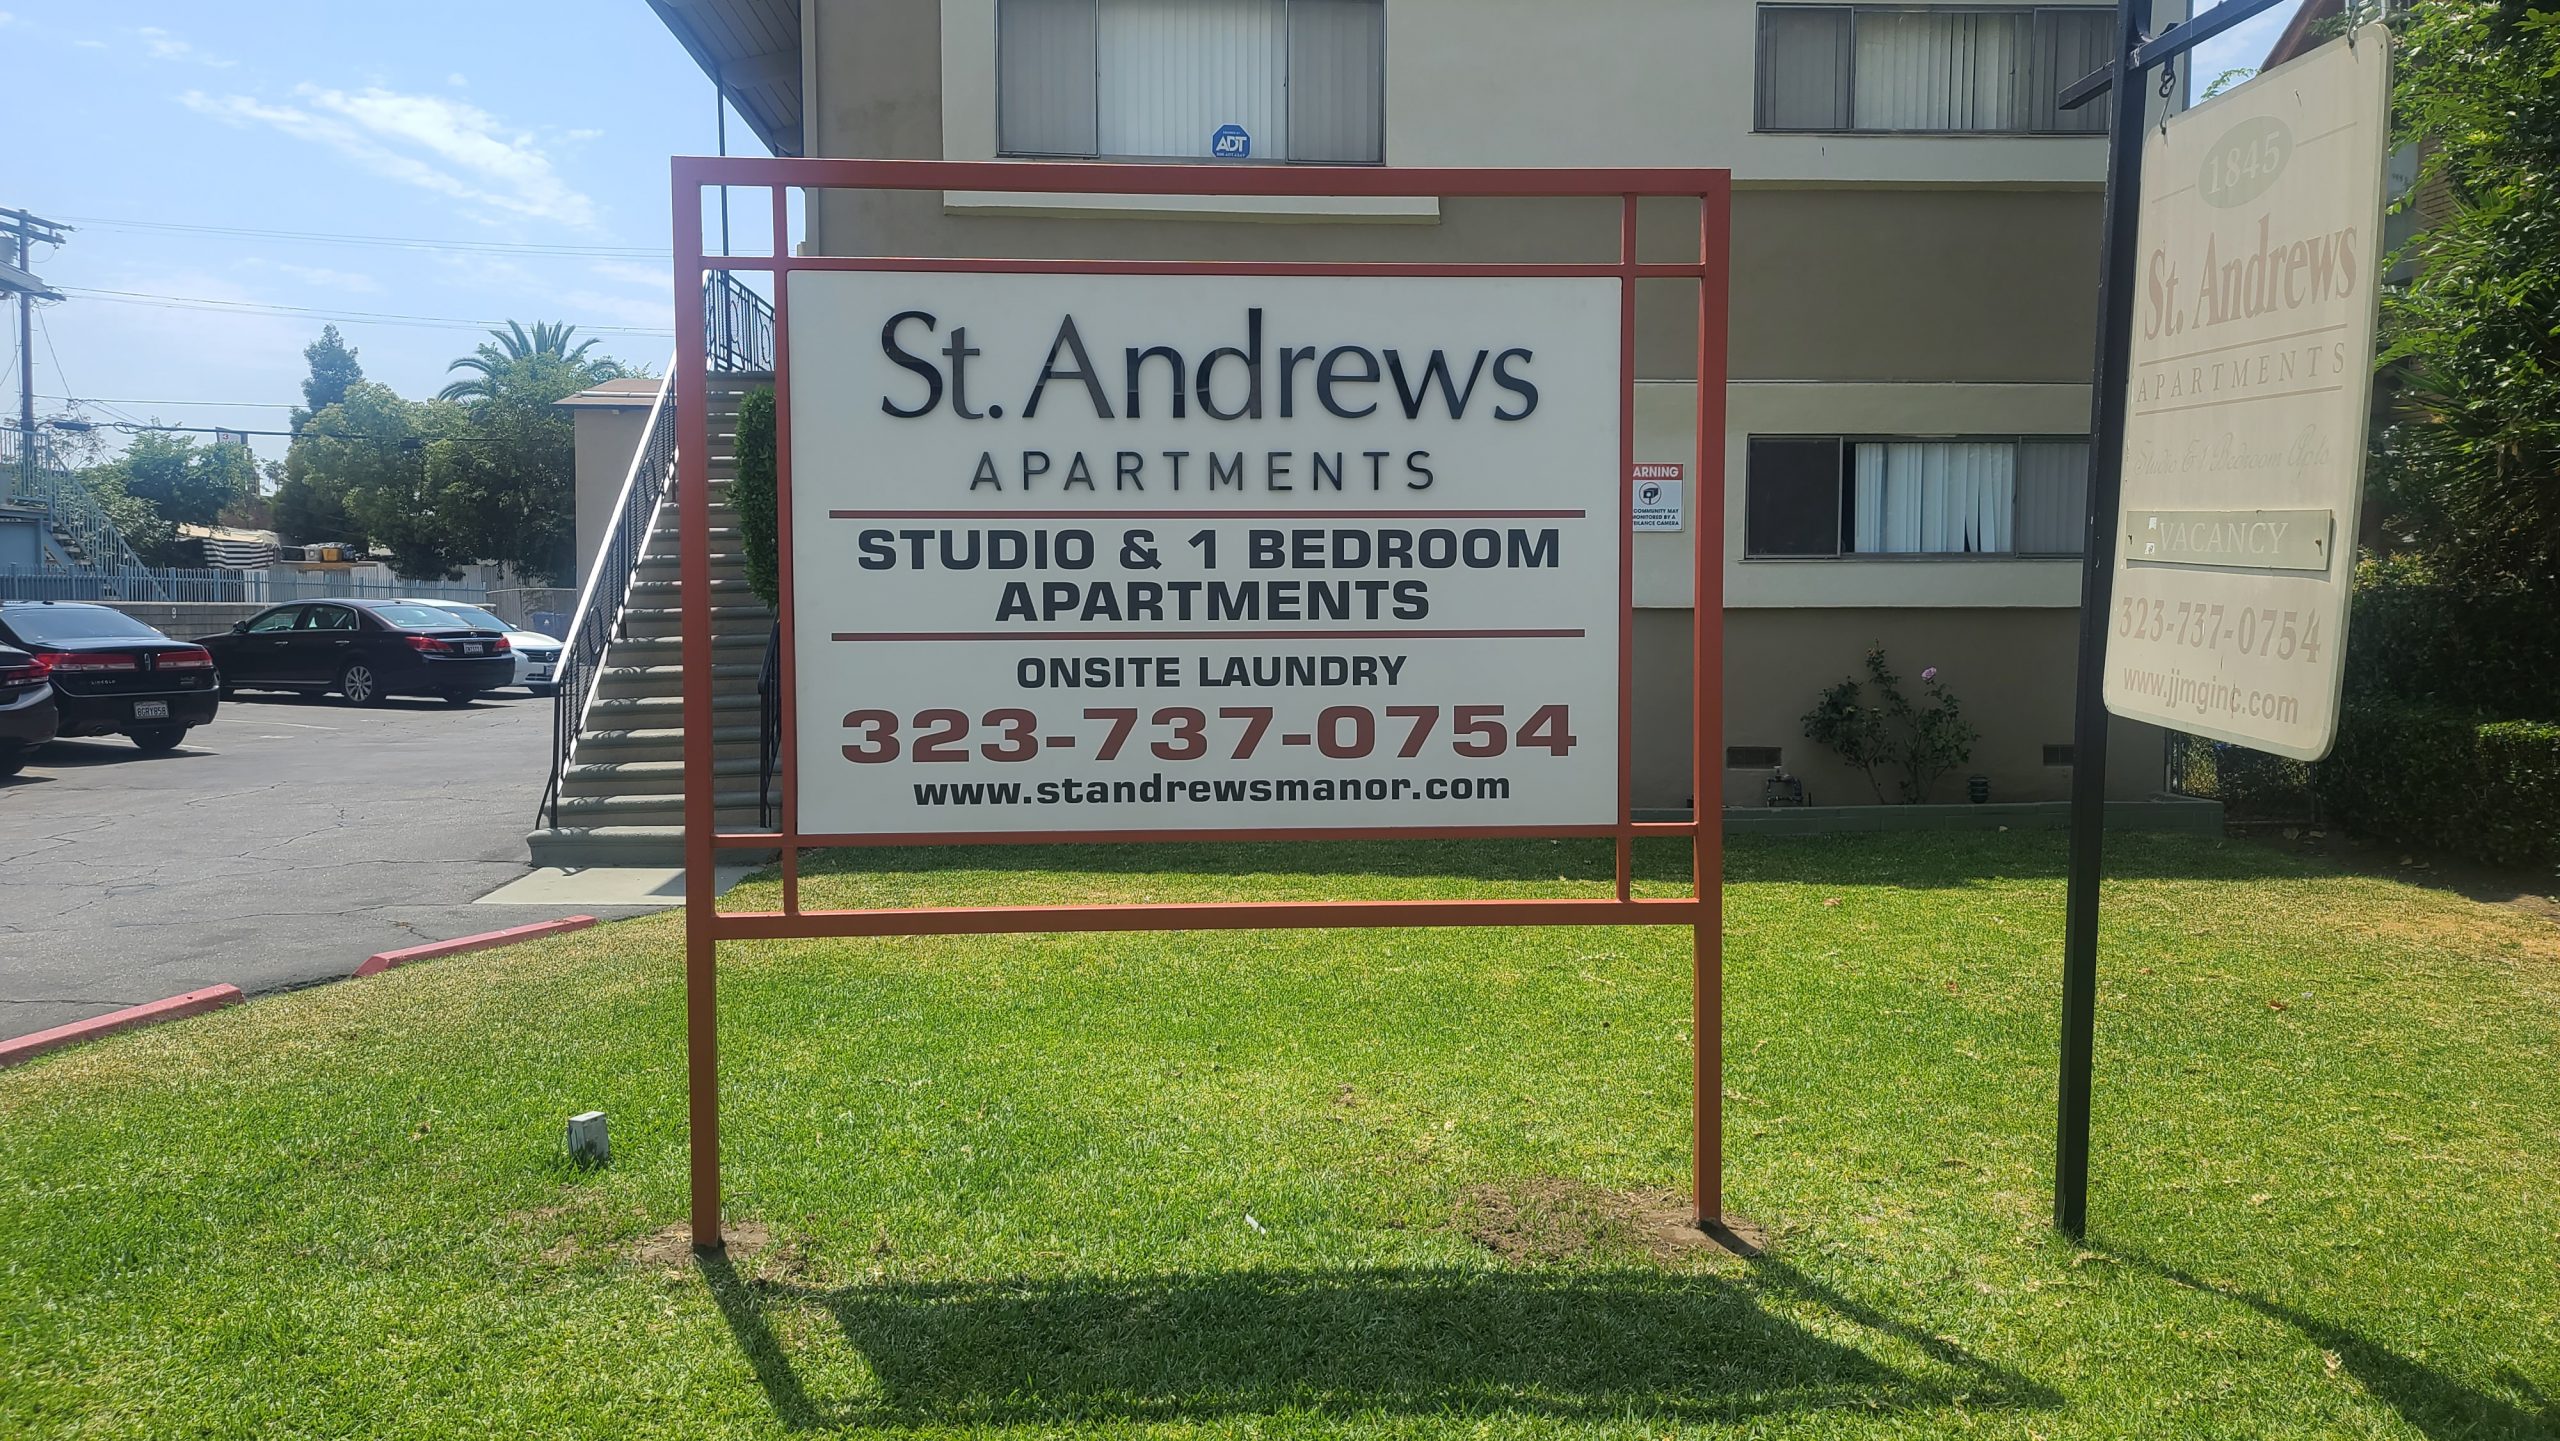 This is the monument sign we made for Jones and Jones' St. Andrews property, part of our broader sign package for the company.